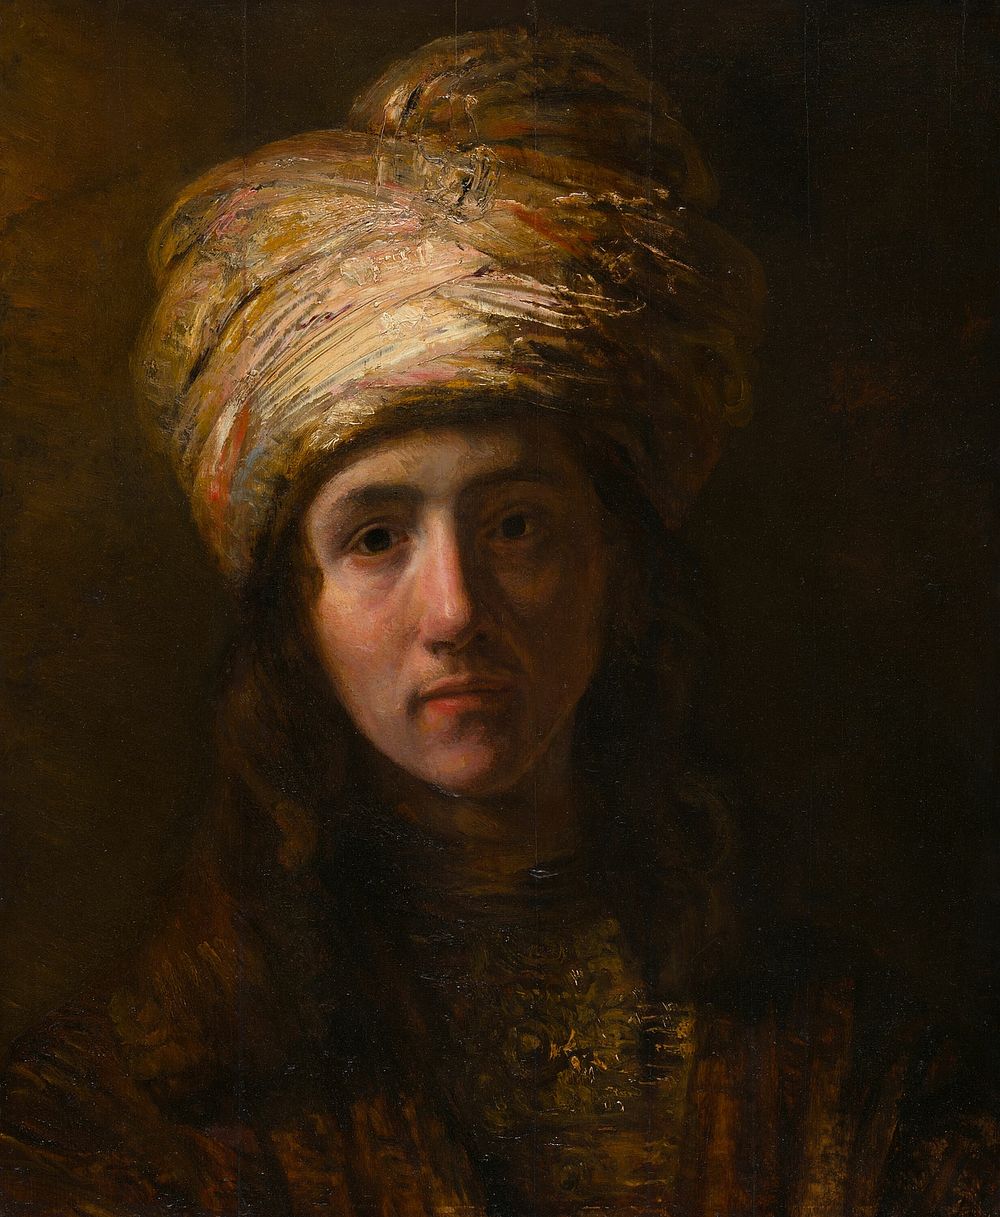 Young Man in a Turban by Follower of Rembrandt van Rijn